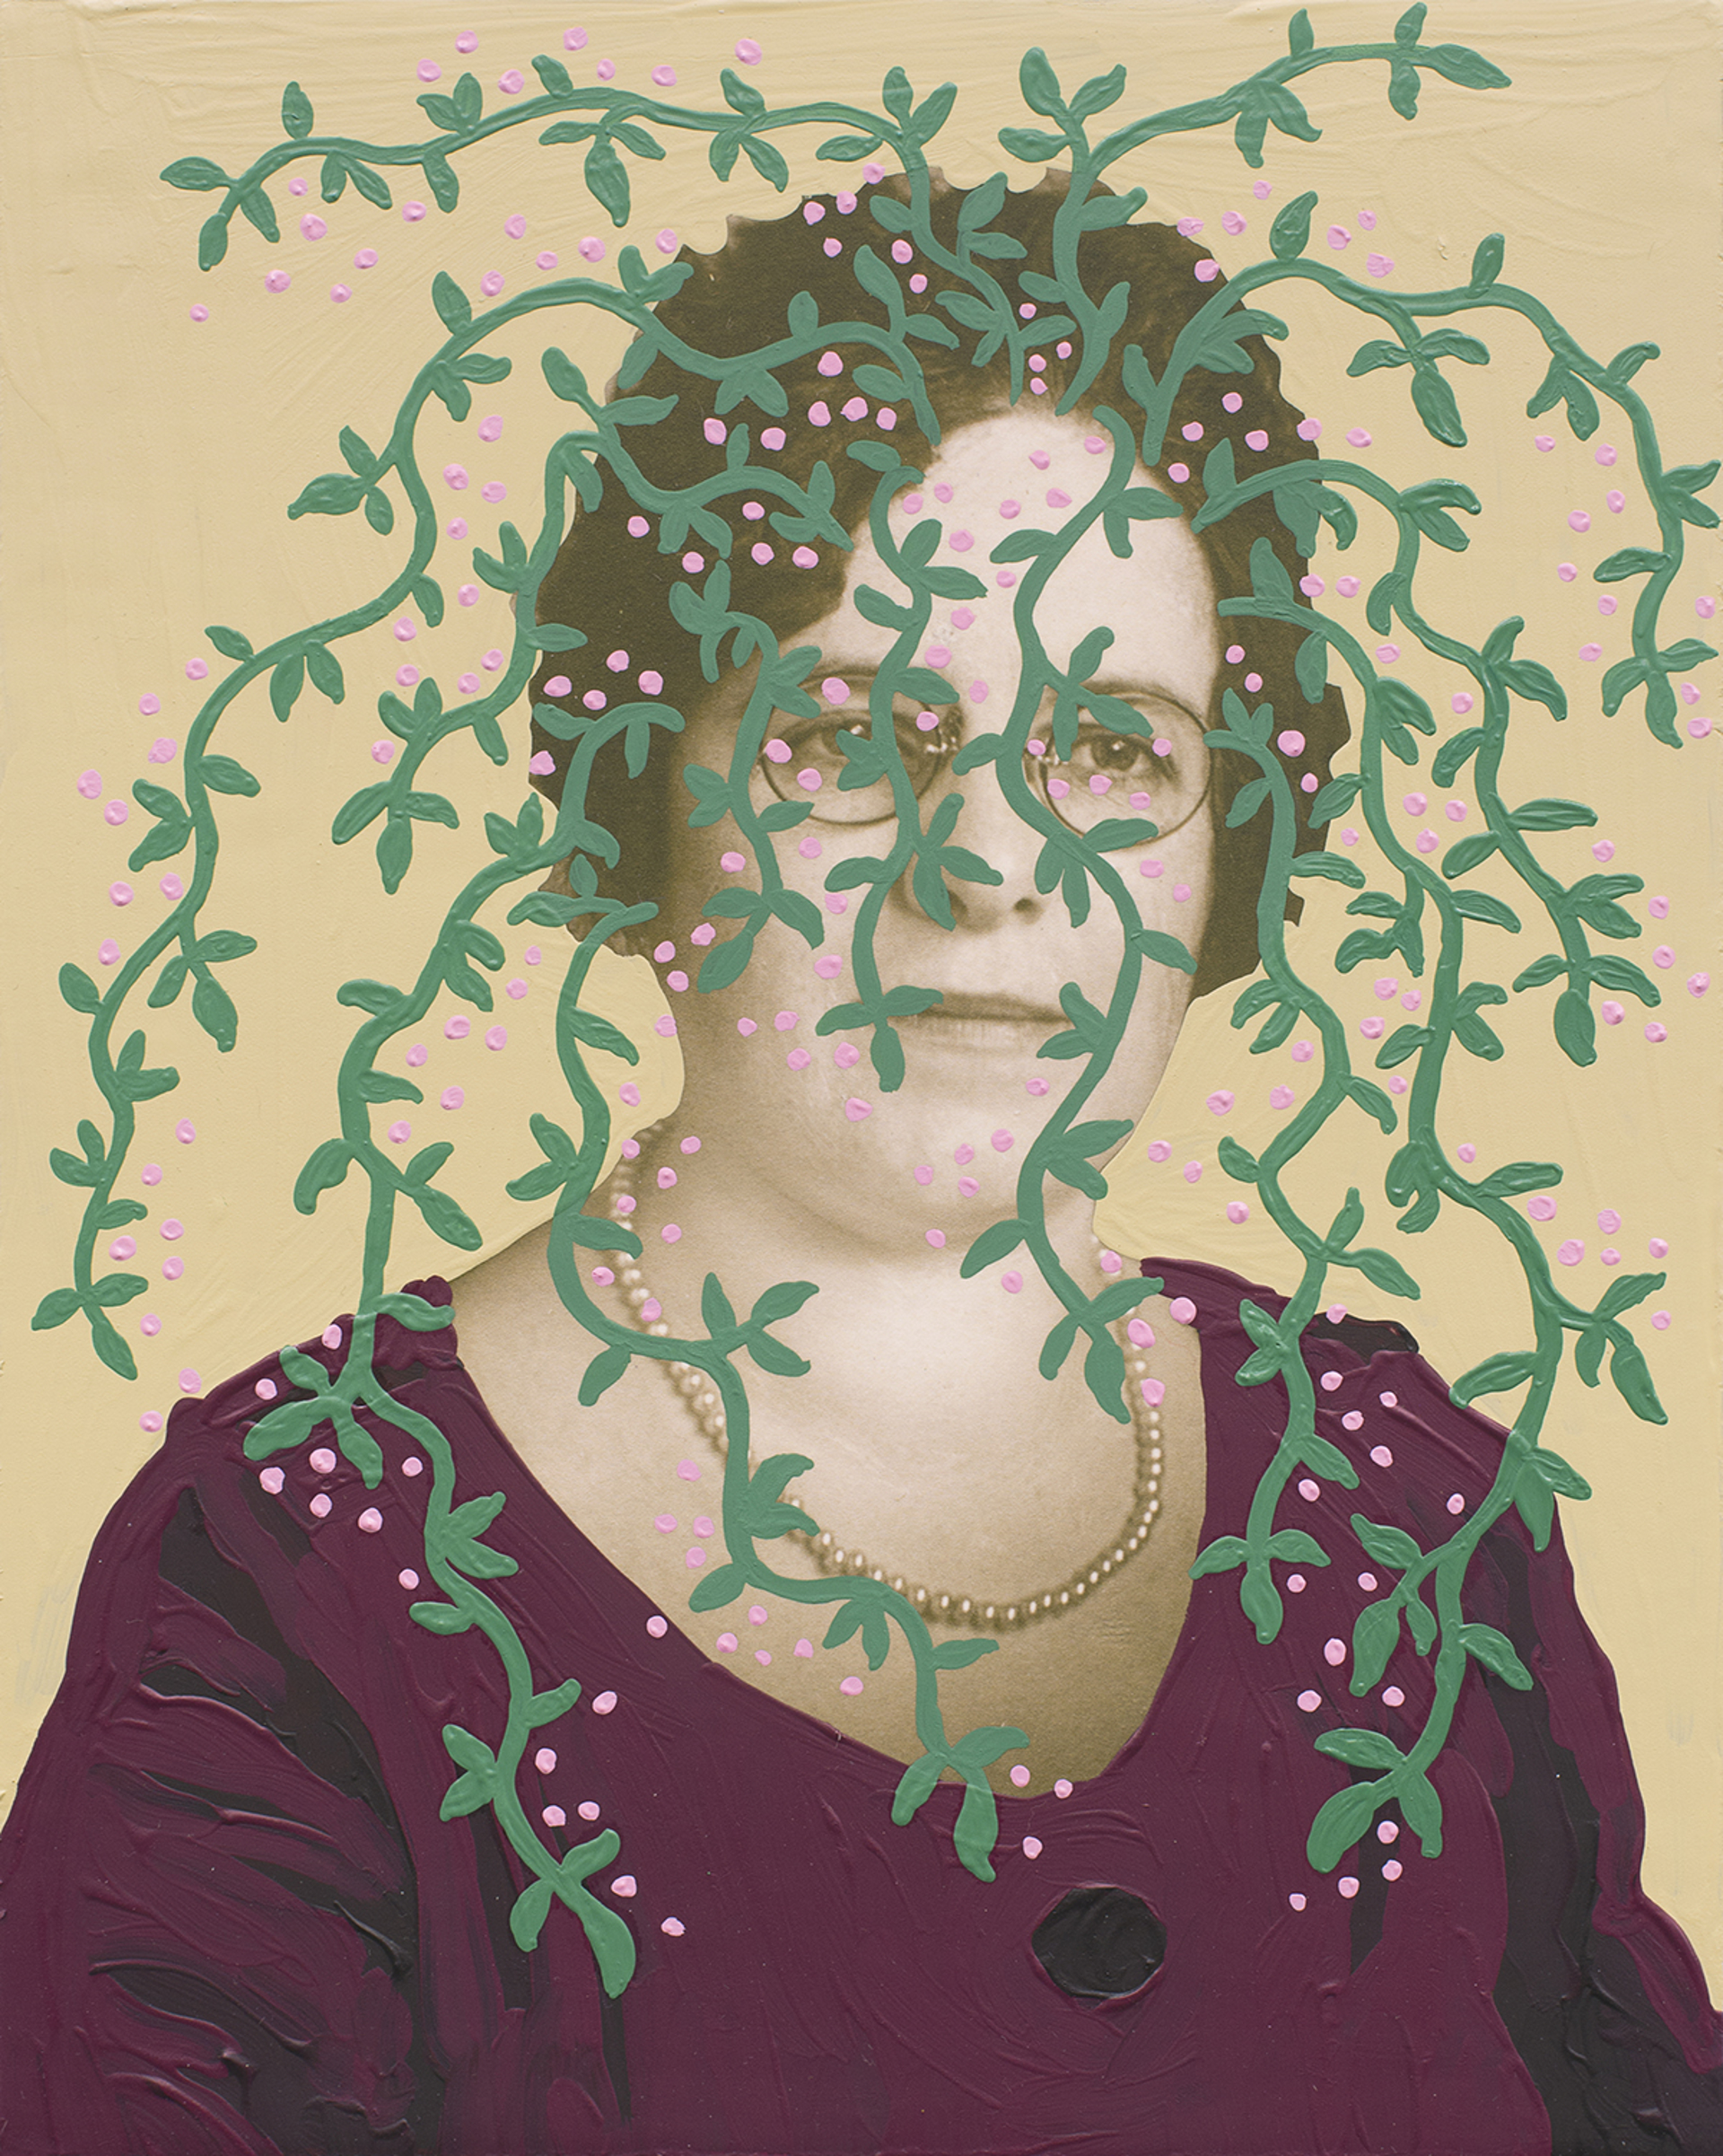 Untitled Woman With Green Vines And Cream Background By Daisy